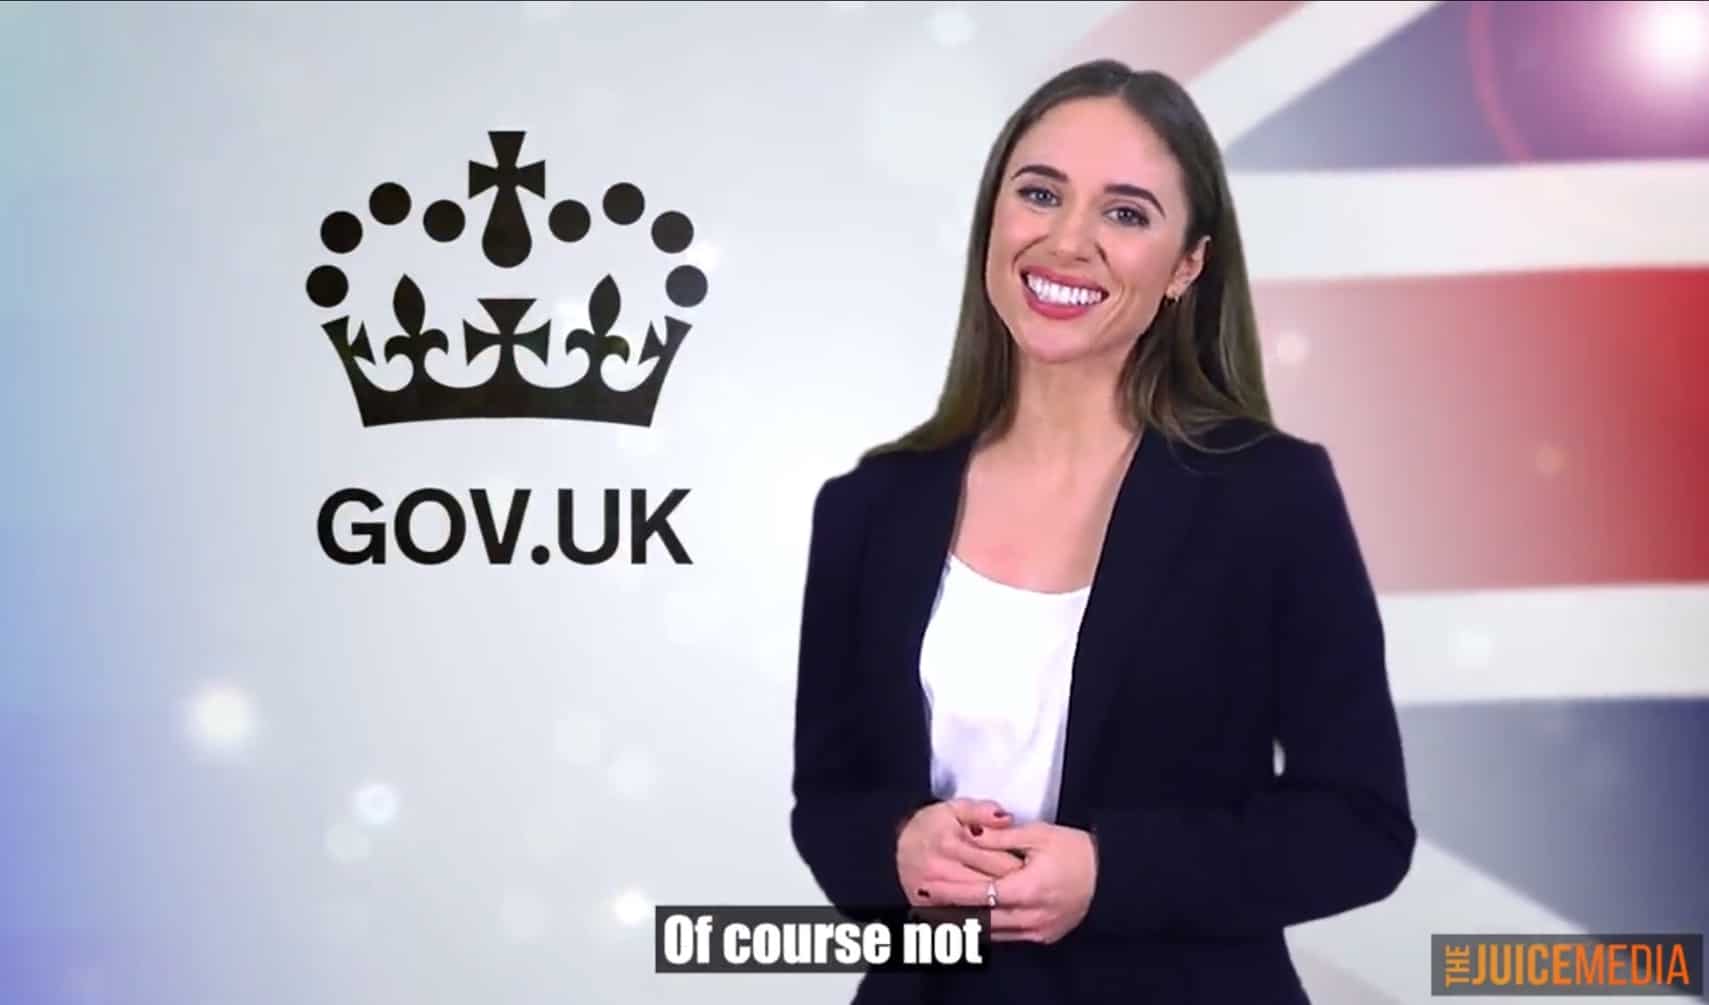 ‘Honest’ government ad goes viral